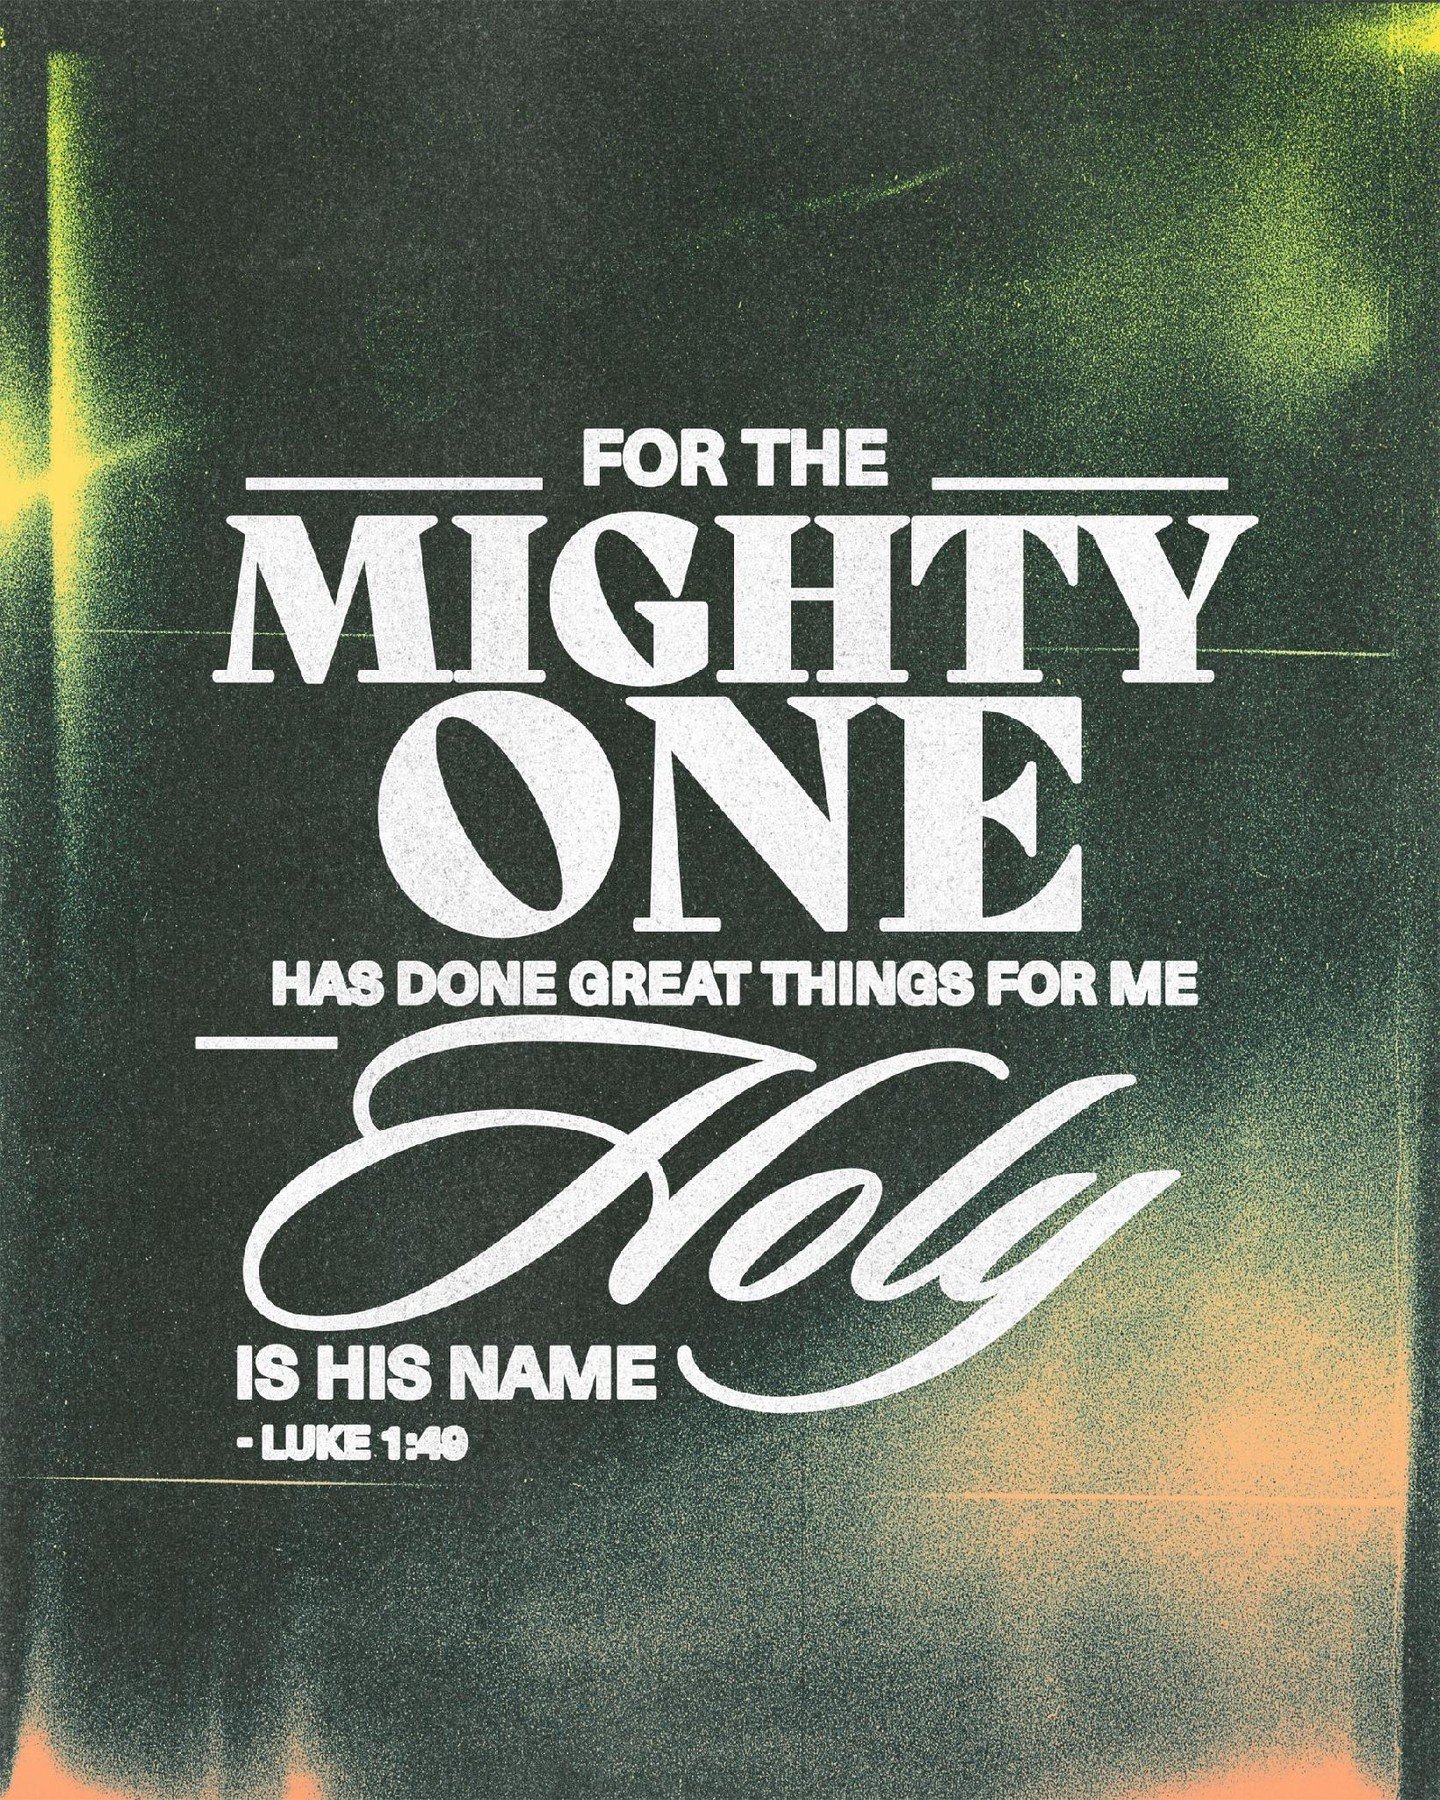 &quot;For the Mighty One has done great things for me - holy is his name.&quot; - Luke 1:49
.
.
.
#church #god #morning #jesus #christ #love #christian #worship #bible #luke